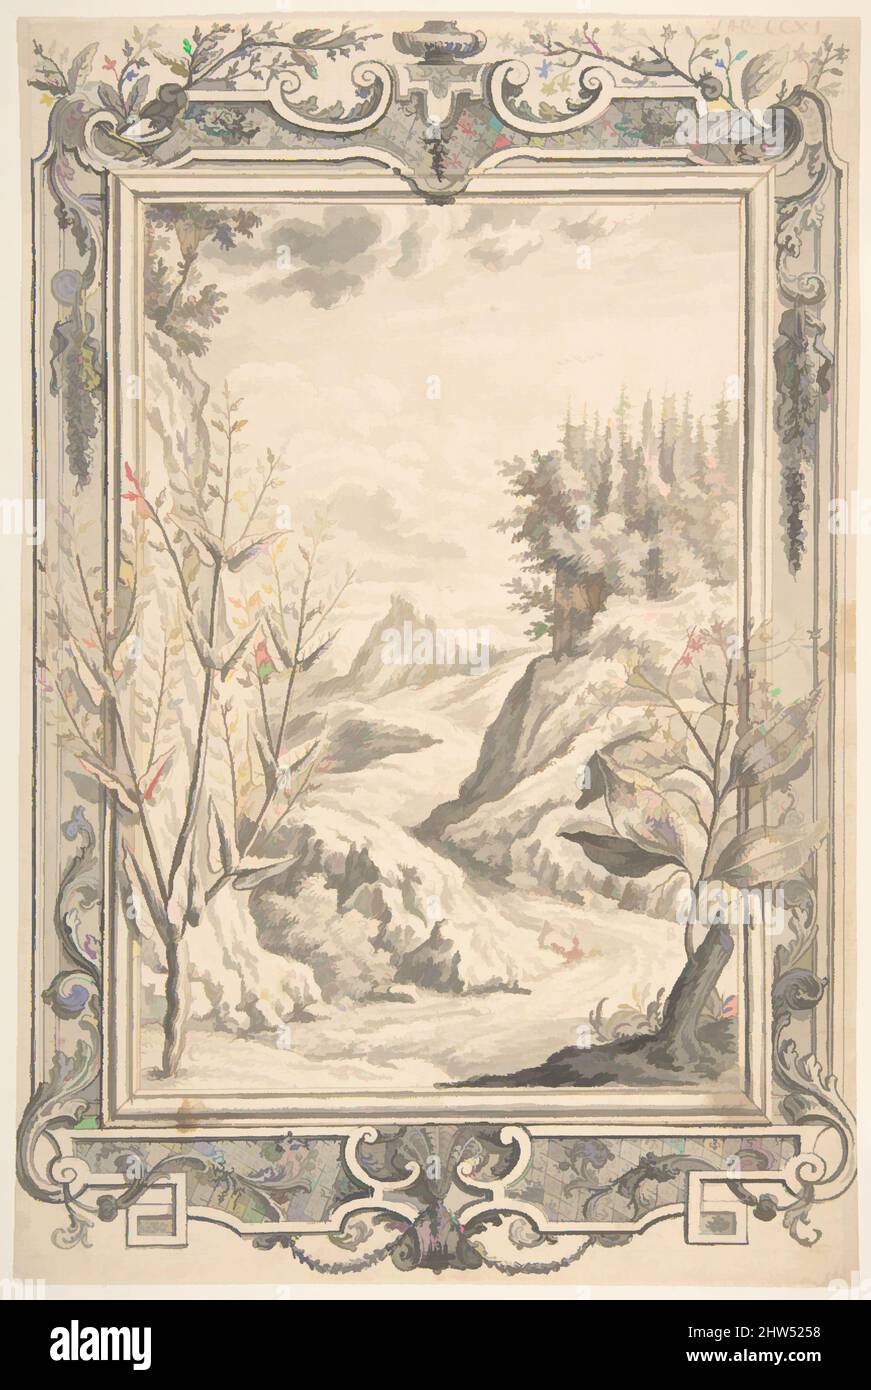 Art inspired by Landscape with Ornamental Frame, ca. 1730, Pen and brown ink, brush and gray wash(landscape), Drawings, Johann Melchior Füssli (Swiss, Zurich 1677–1736 Zurich, Classic works modernized by Artotop with a splash of modernity. Shapes, color and value, eye-catching visual impact on art. Emotions through freedom of artworks in a contemporary way. A timeless message pursuing a wildly creative new direction. Artists turning to the digital medium and creating the Artotop NFT Stock Photo